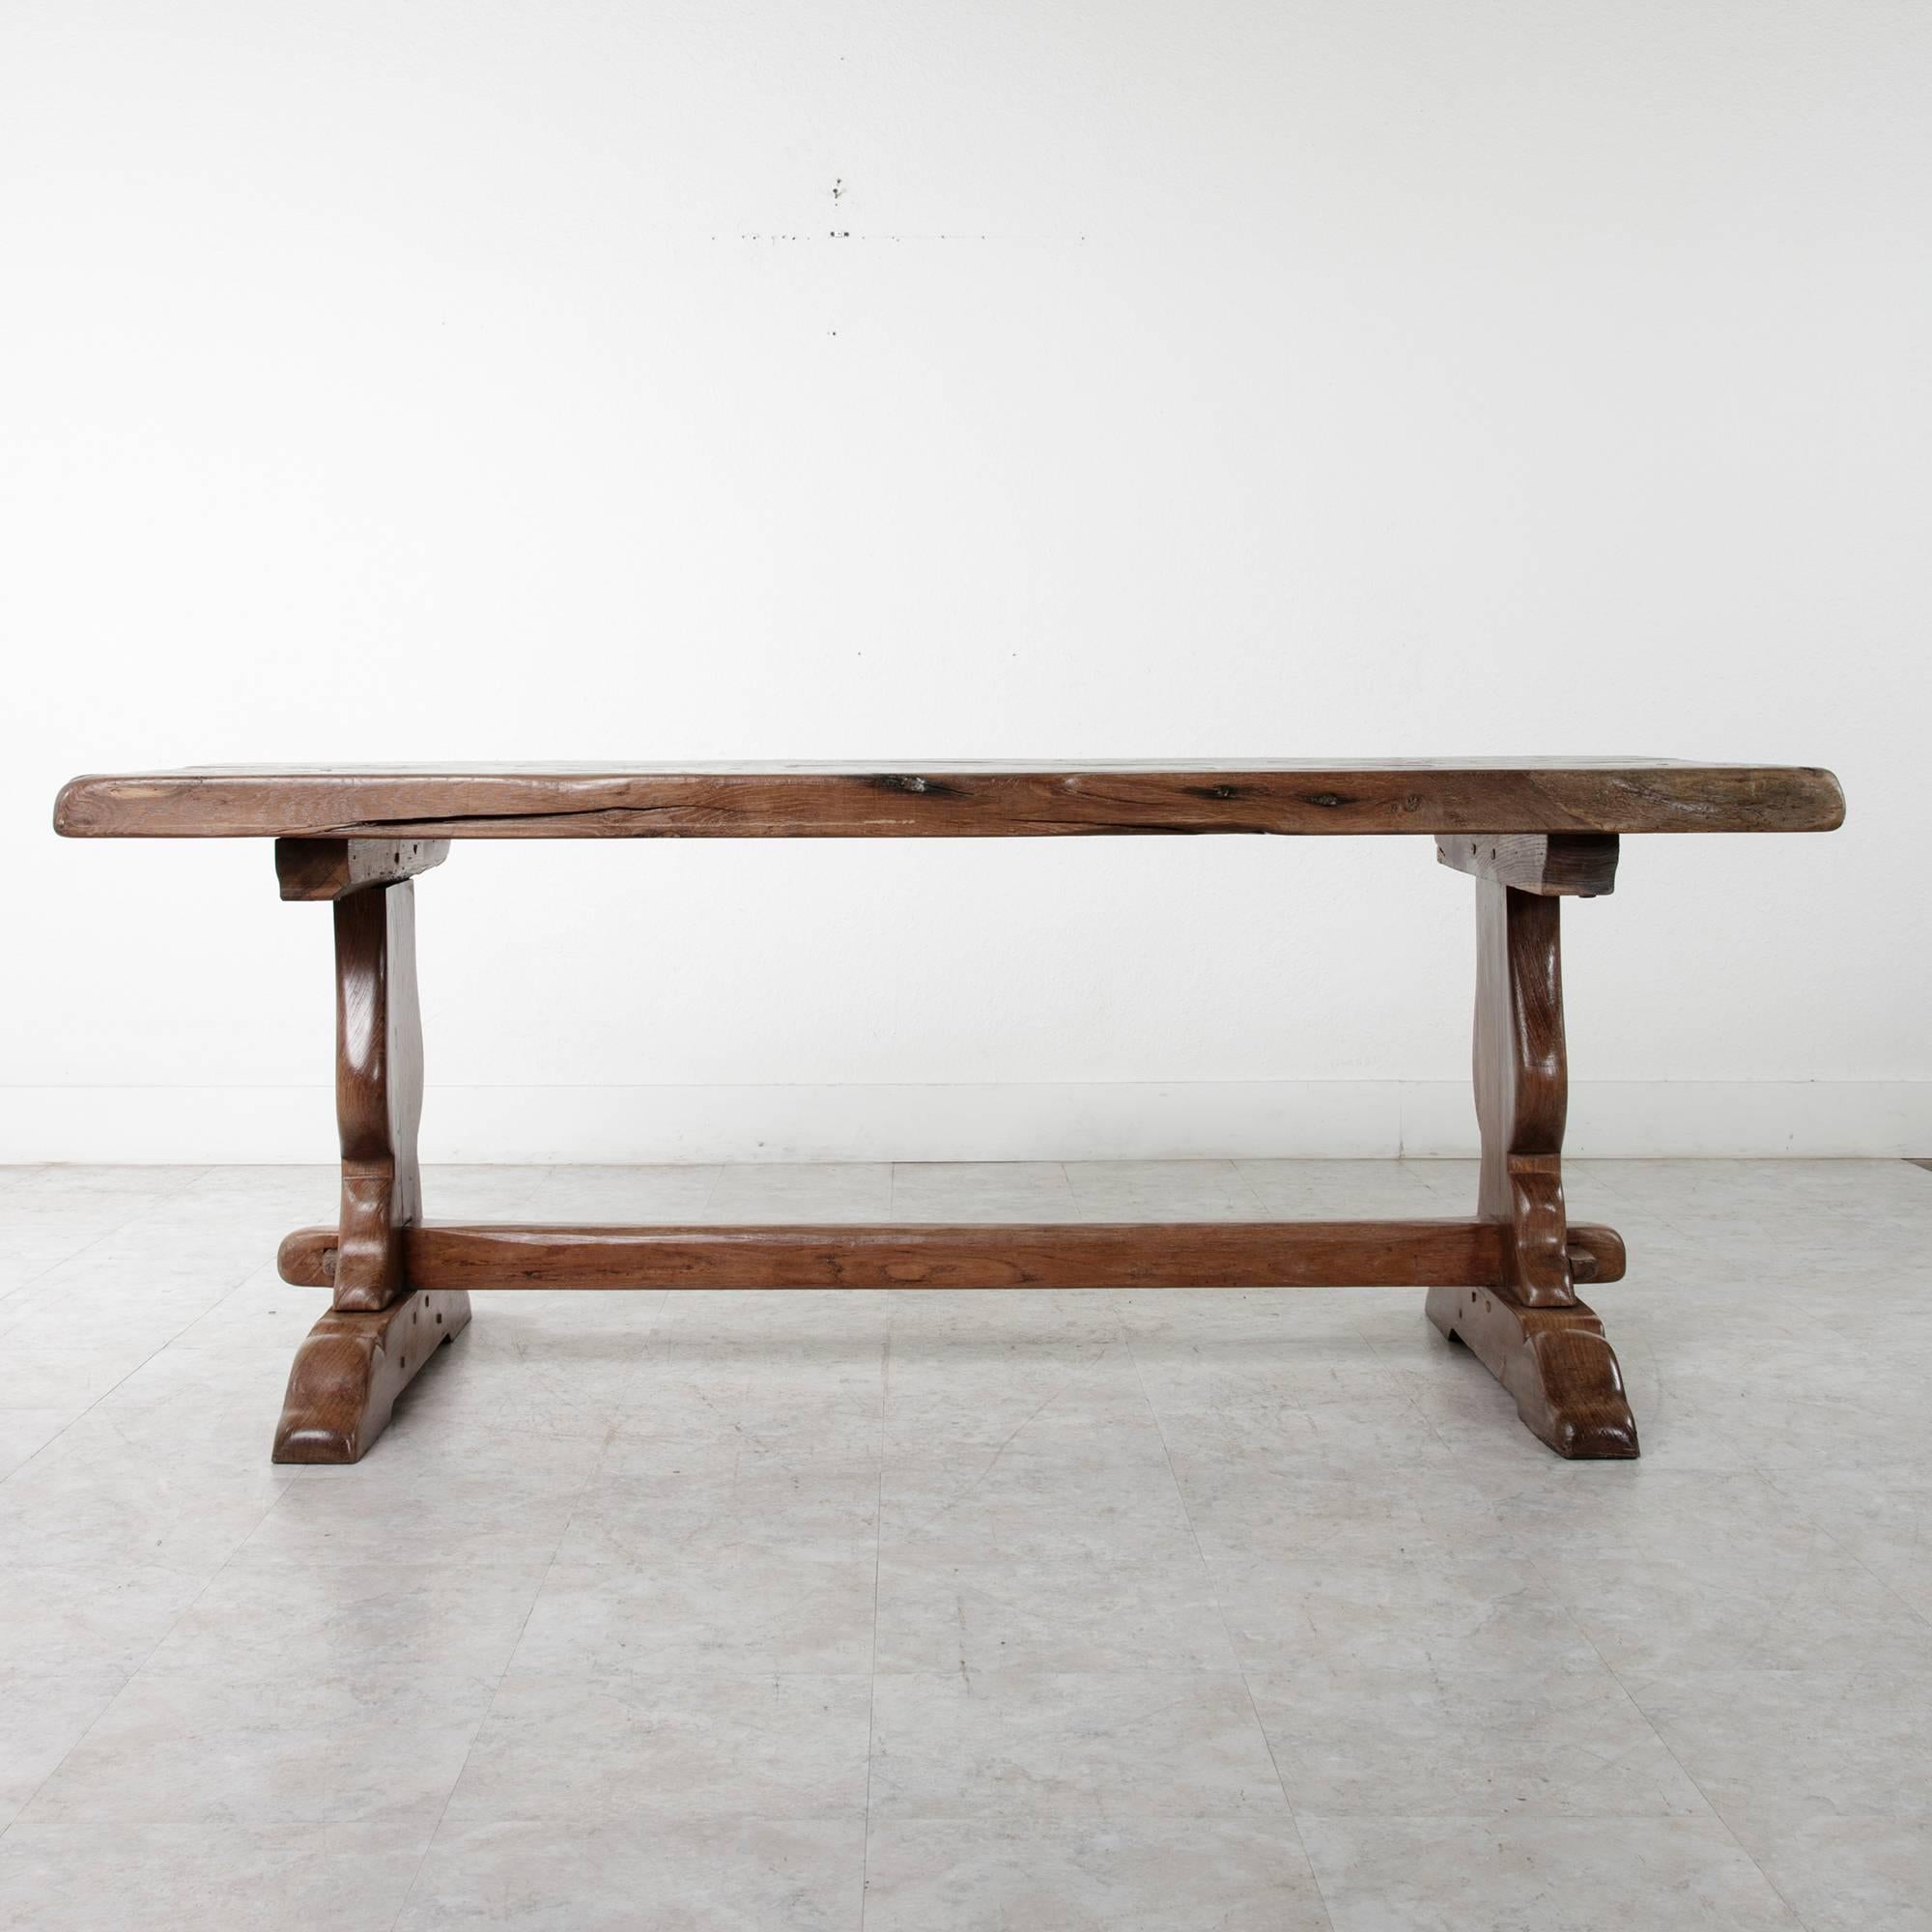 Antique French Farm Table in the Monastery Style of Solid Oak from 18th Century 1